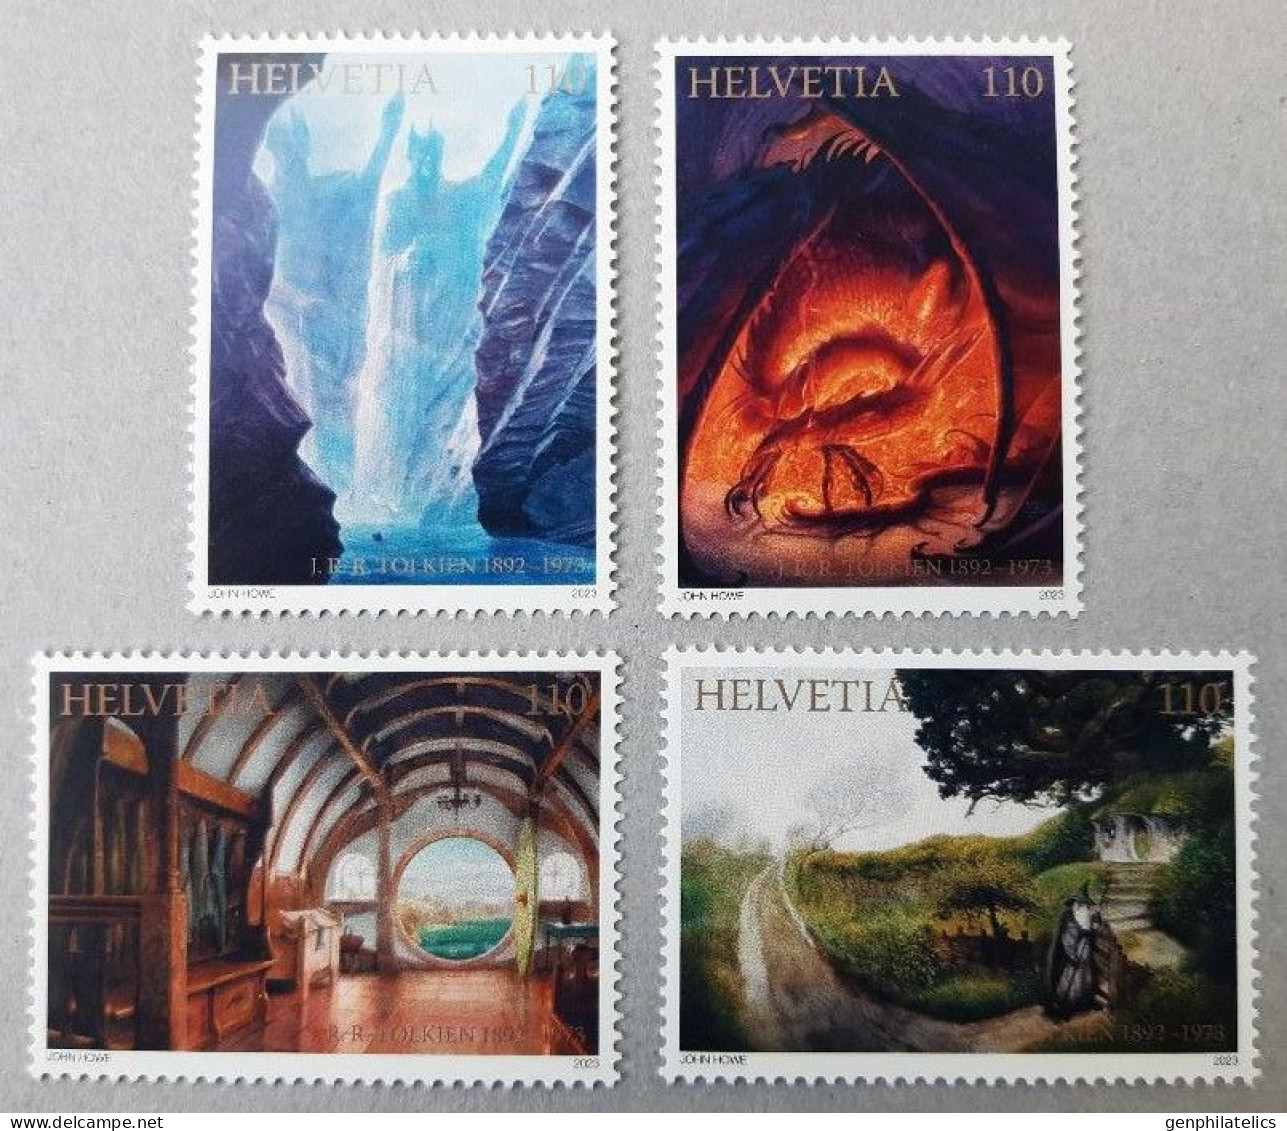 SWITZERLAND 2023 PEOPLE Famous Persons - J.R.R. TOLKIEN - Fine Set (self-adhesive) MNH - Nuovi